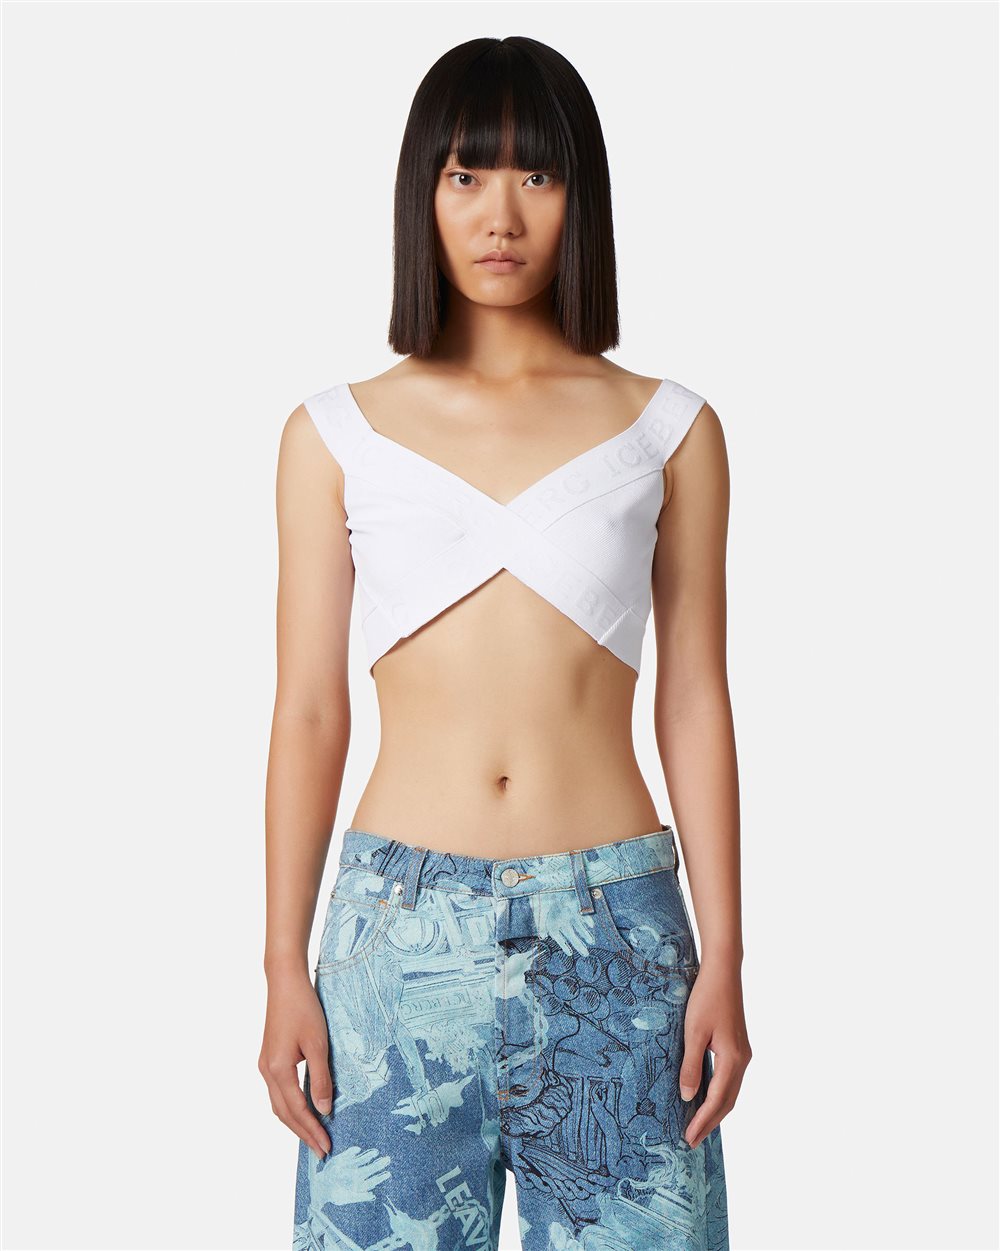 Butterfly top with logo - Iceberg - Official Website